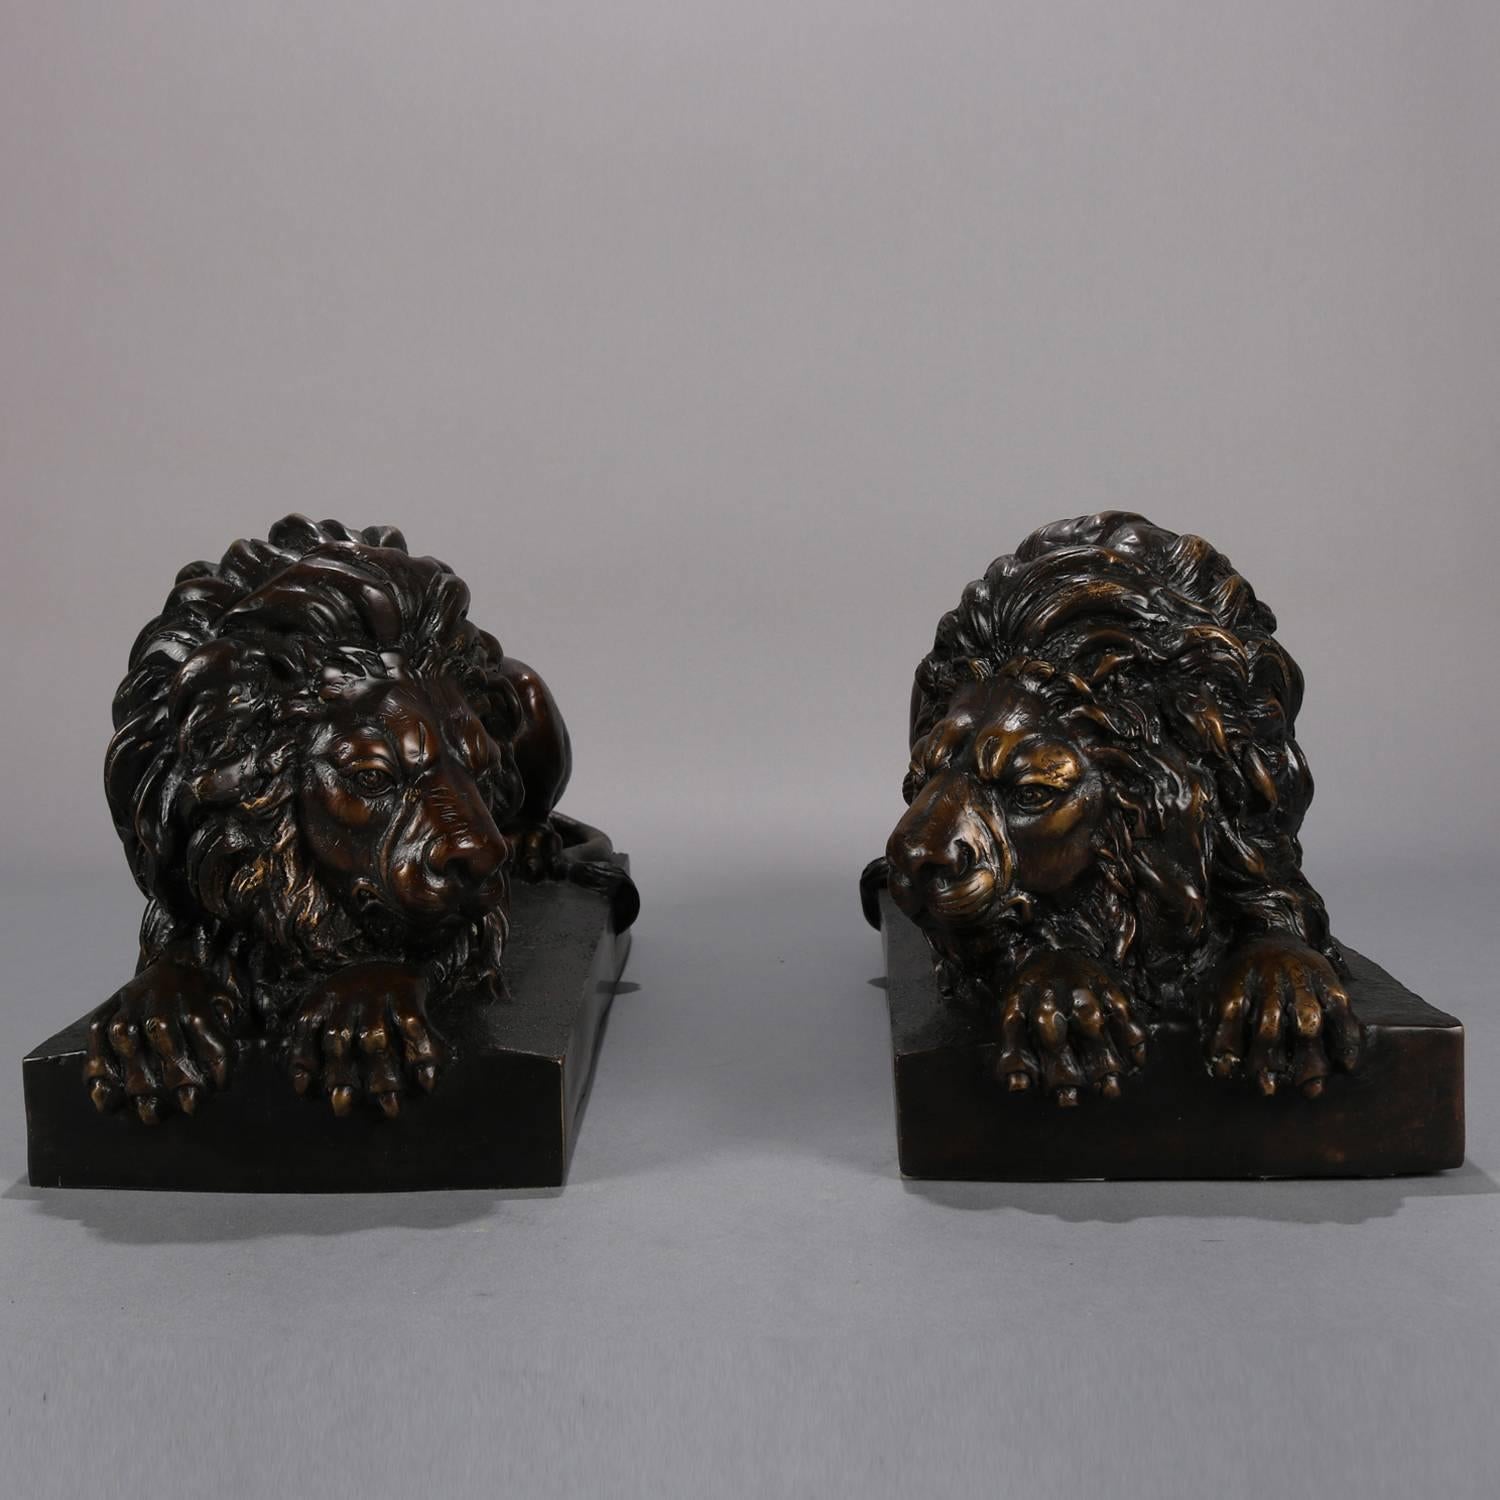 Pair of finely detailed bronzed cast metal sculptures of resting recumbent African lions, 20th century

Measure: 9